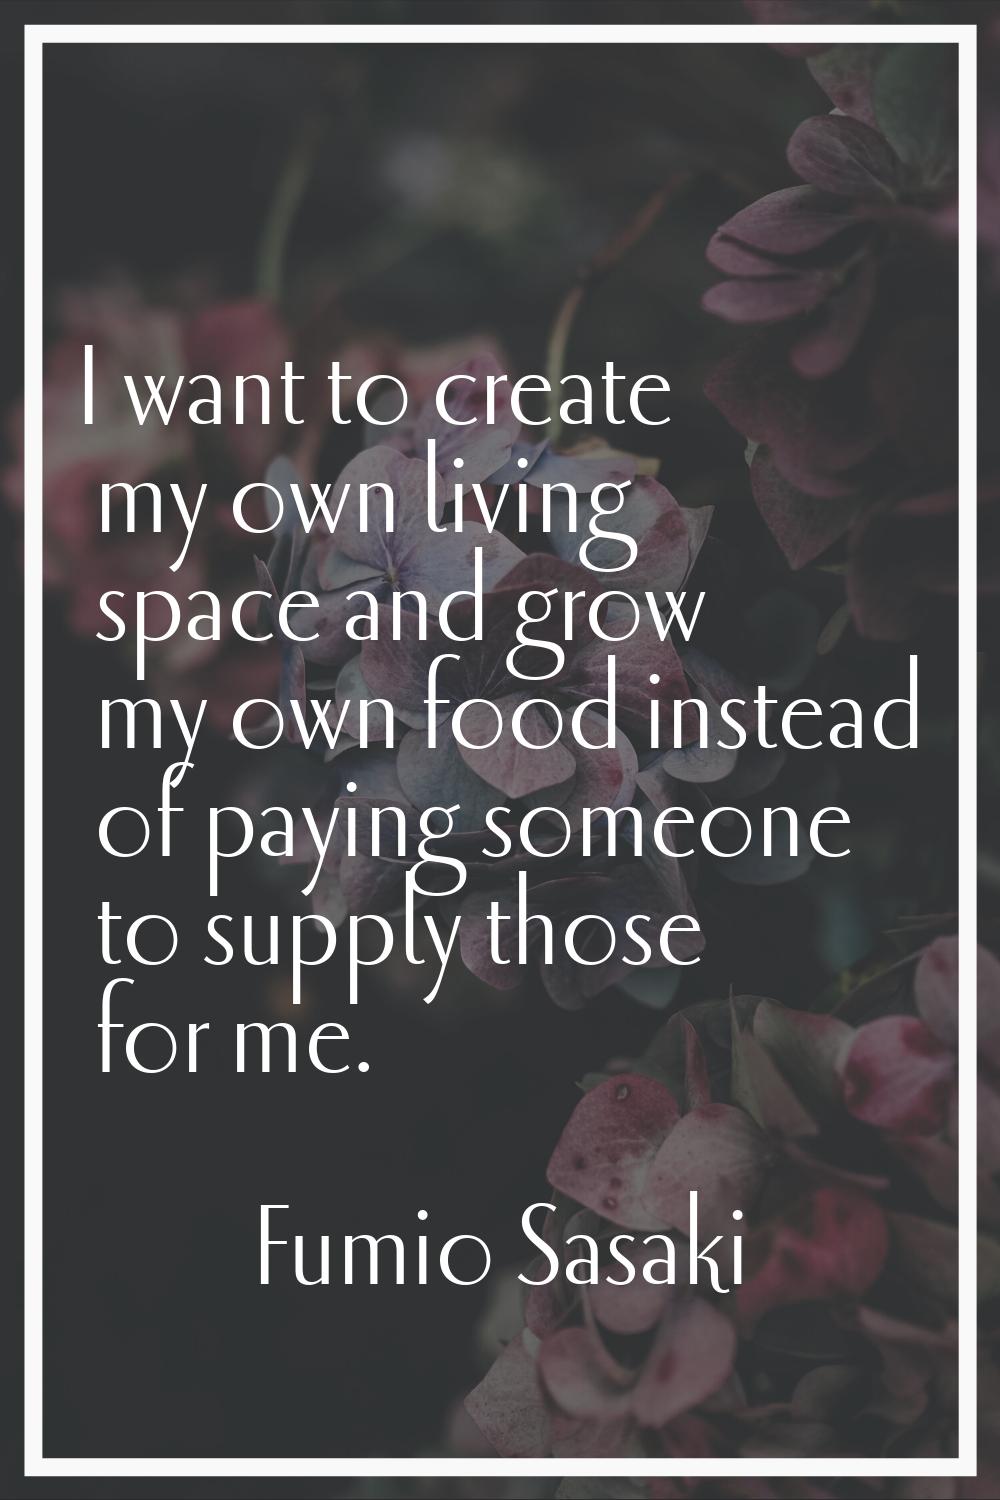 I want to create my own living space and grow my own food instead of paying someone to supply those